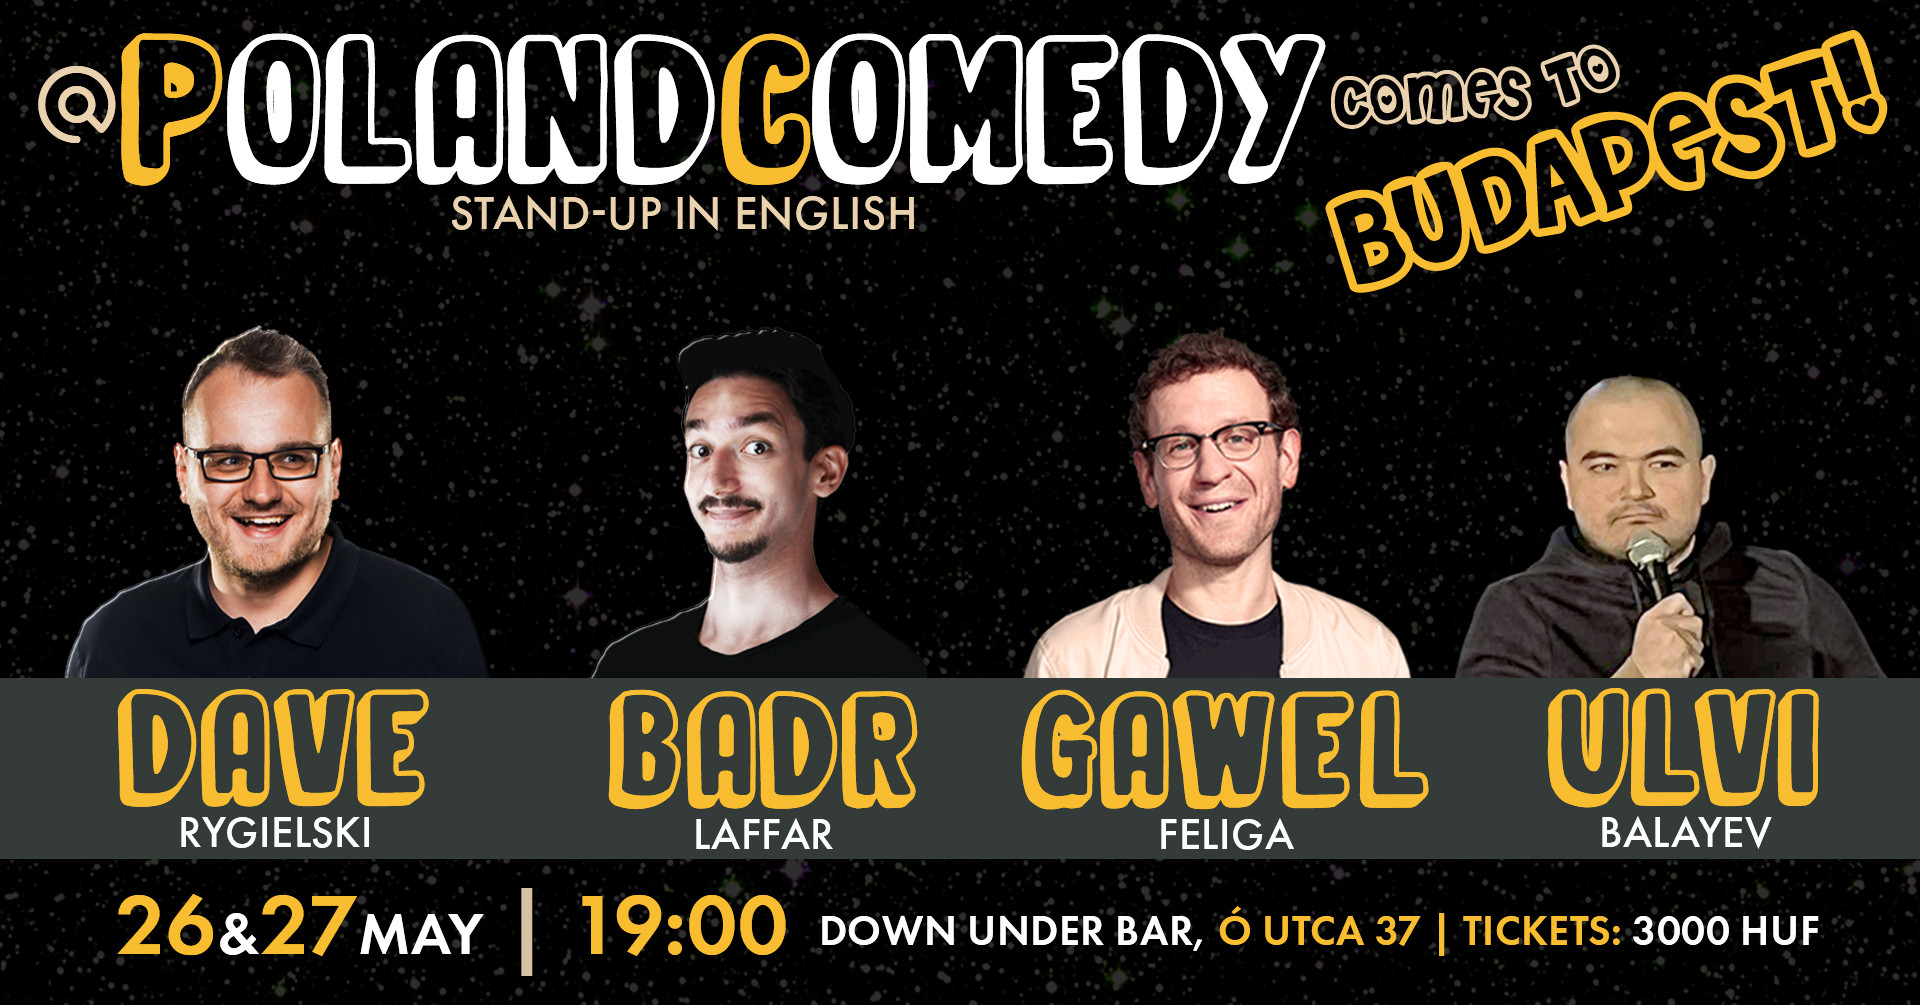 Best of @Poland Comedy, Down Under Bar Budapest, 26 May